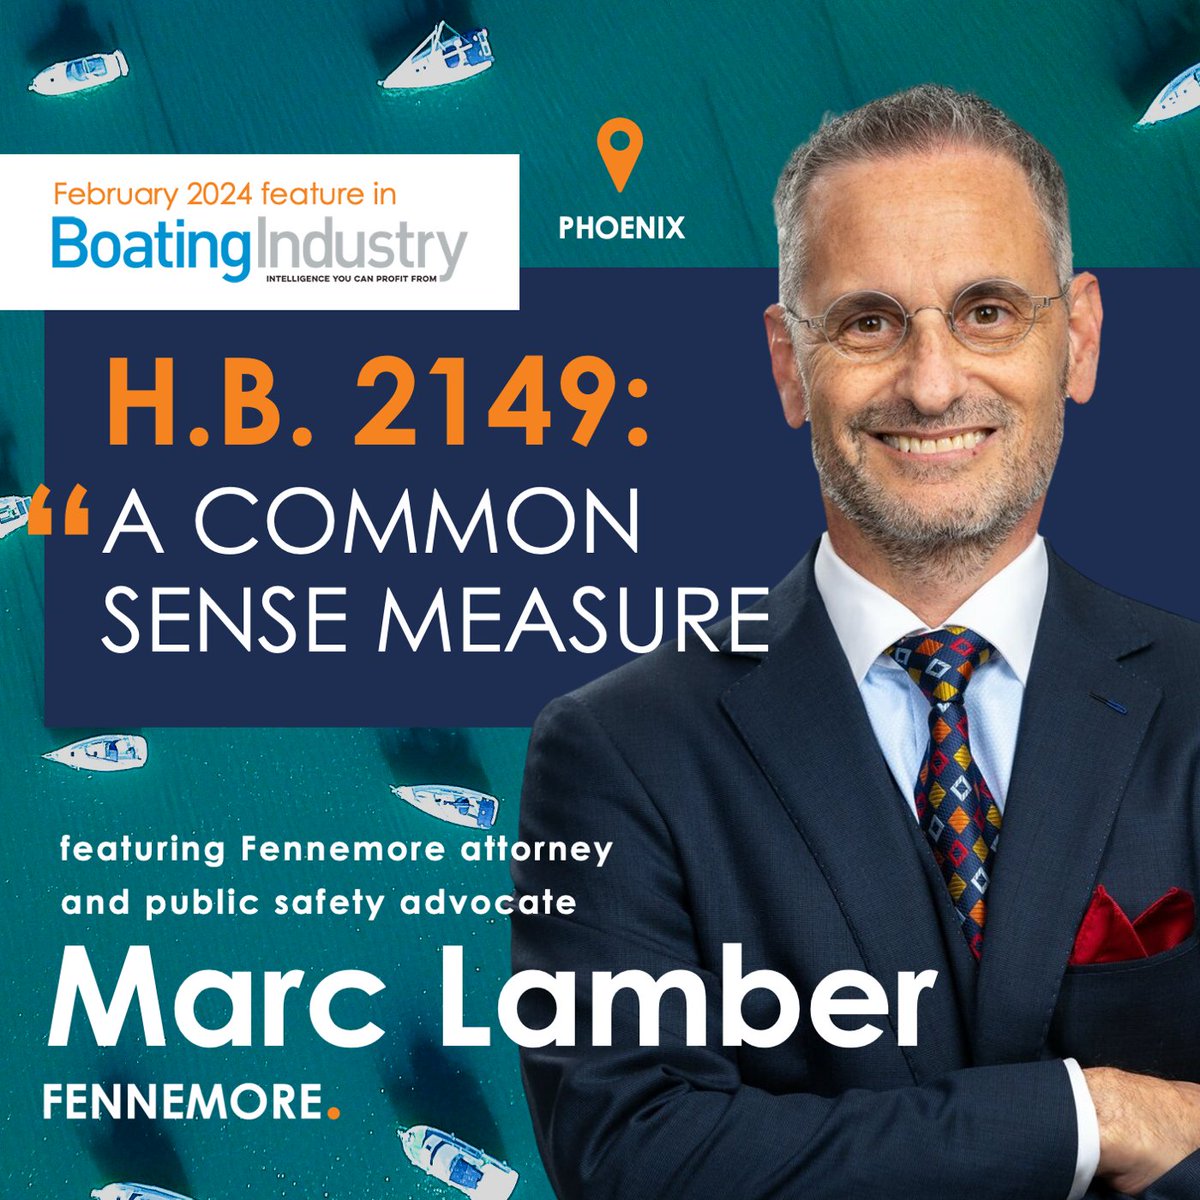 Fennemore's Marc Lamber was quoted on the development in a recent article from Boating Industry. 
ow.ly/siH550QM5rF

#Boating #SafeSummers #LegalNews #BoatersLicense #Fennemore #Phoenix